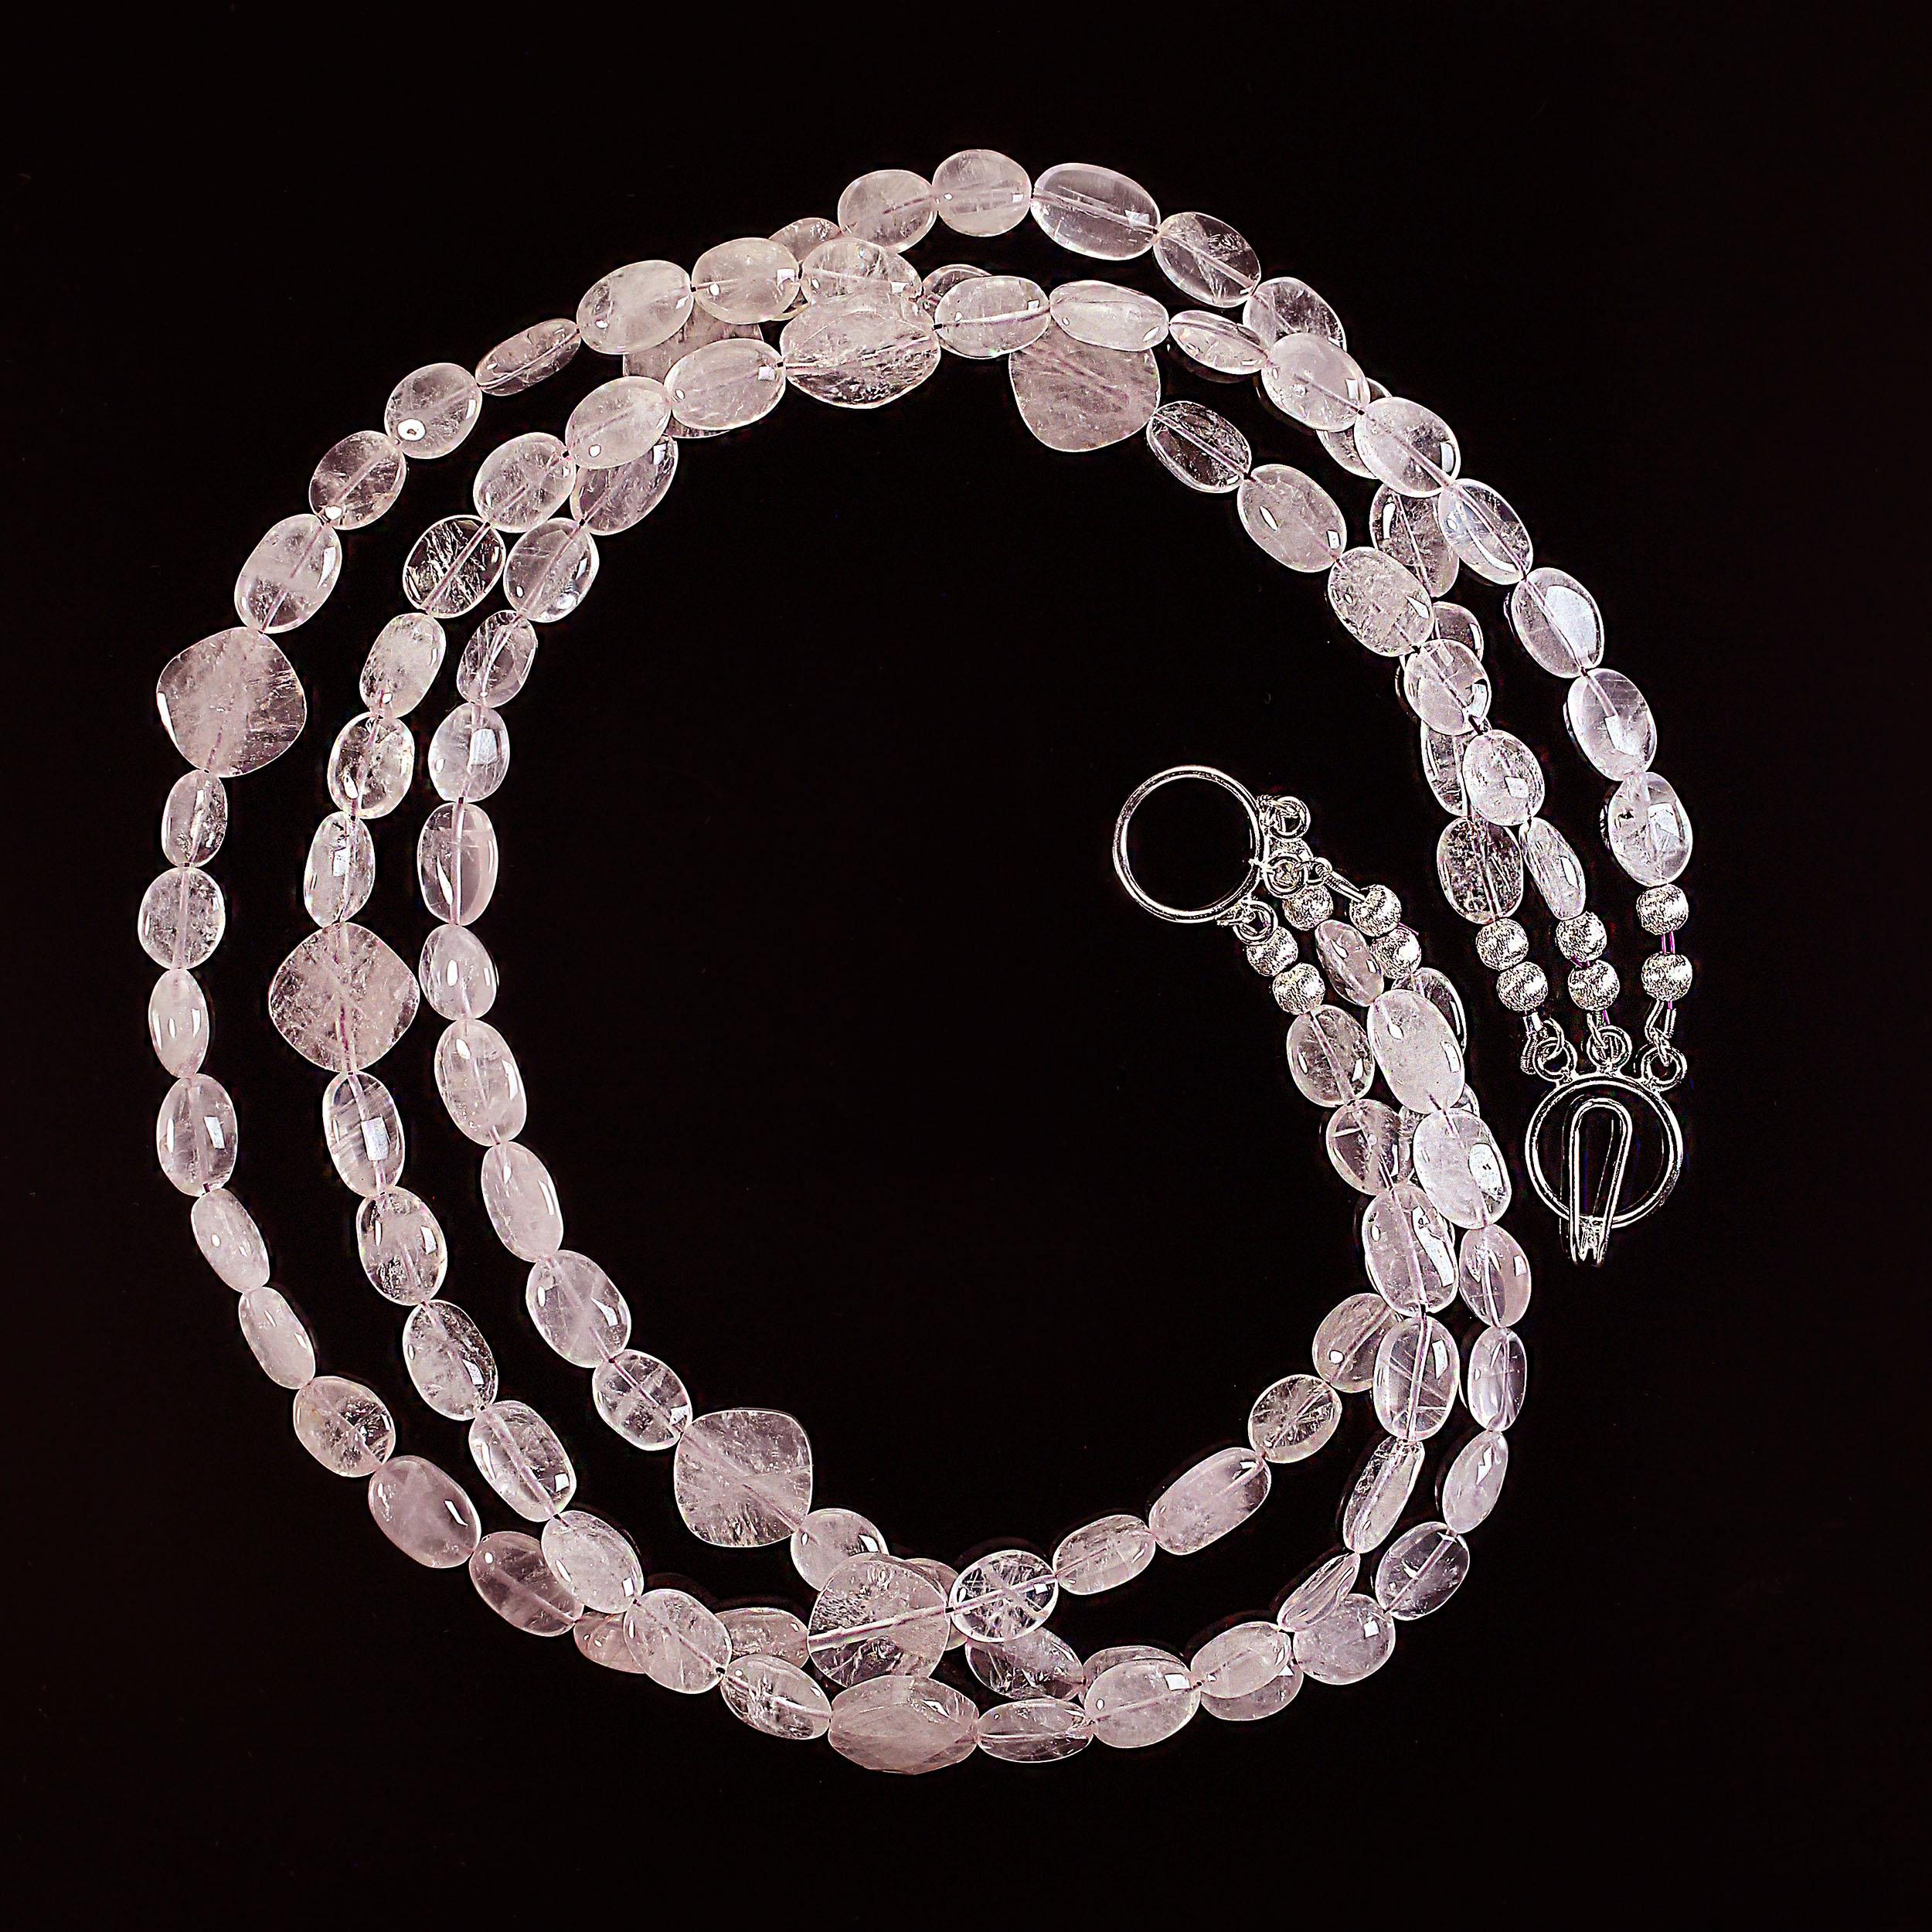 Bead AJD 19 Inch Three strand  Glowing Rose Quartz necklace For Sale